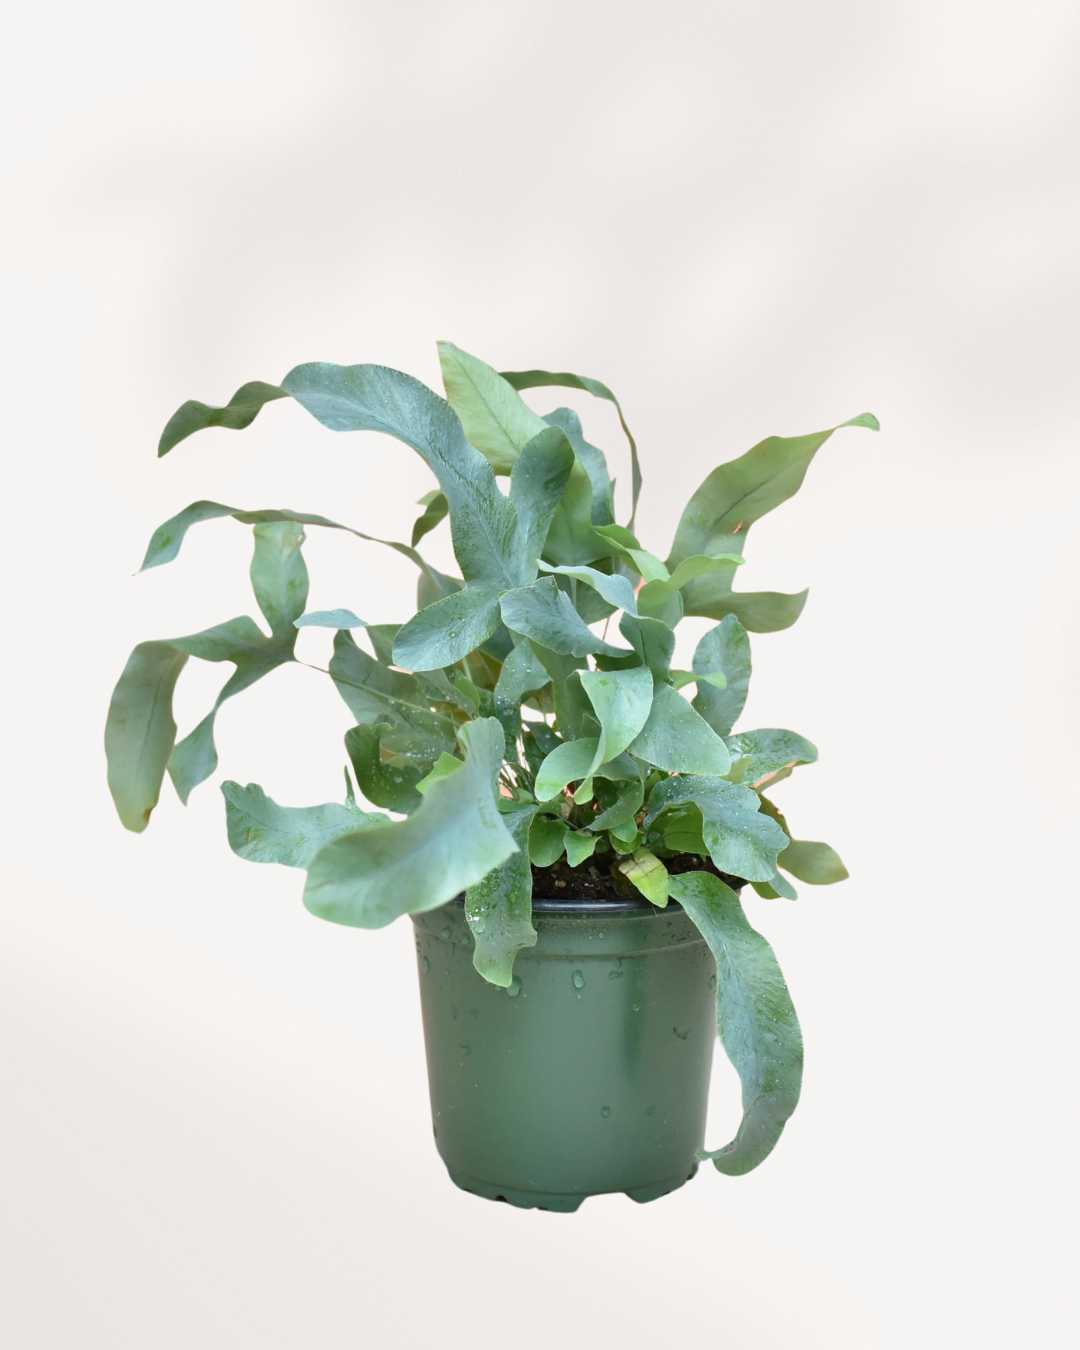 Blue Star Fern | Buy Plants Online - Houseplant Delivery & Care